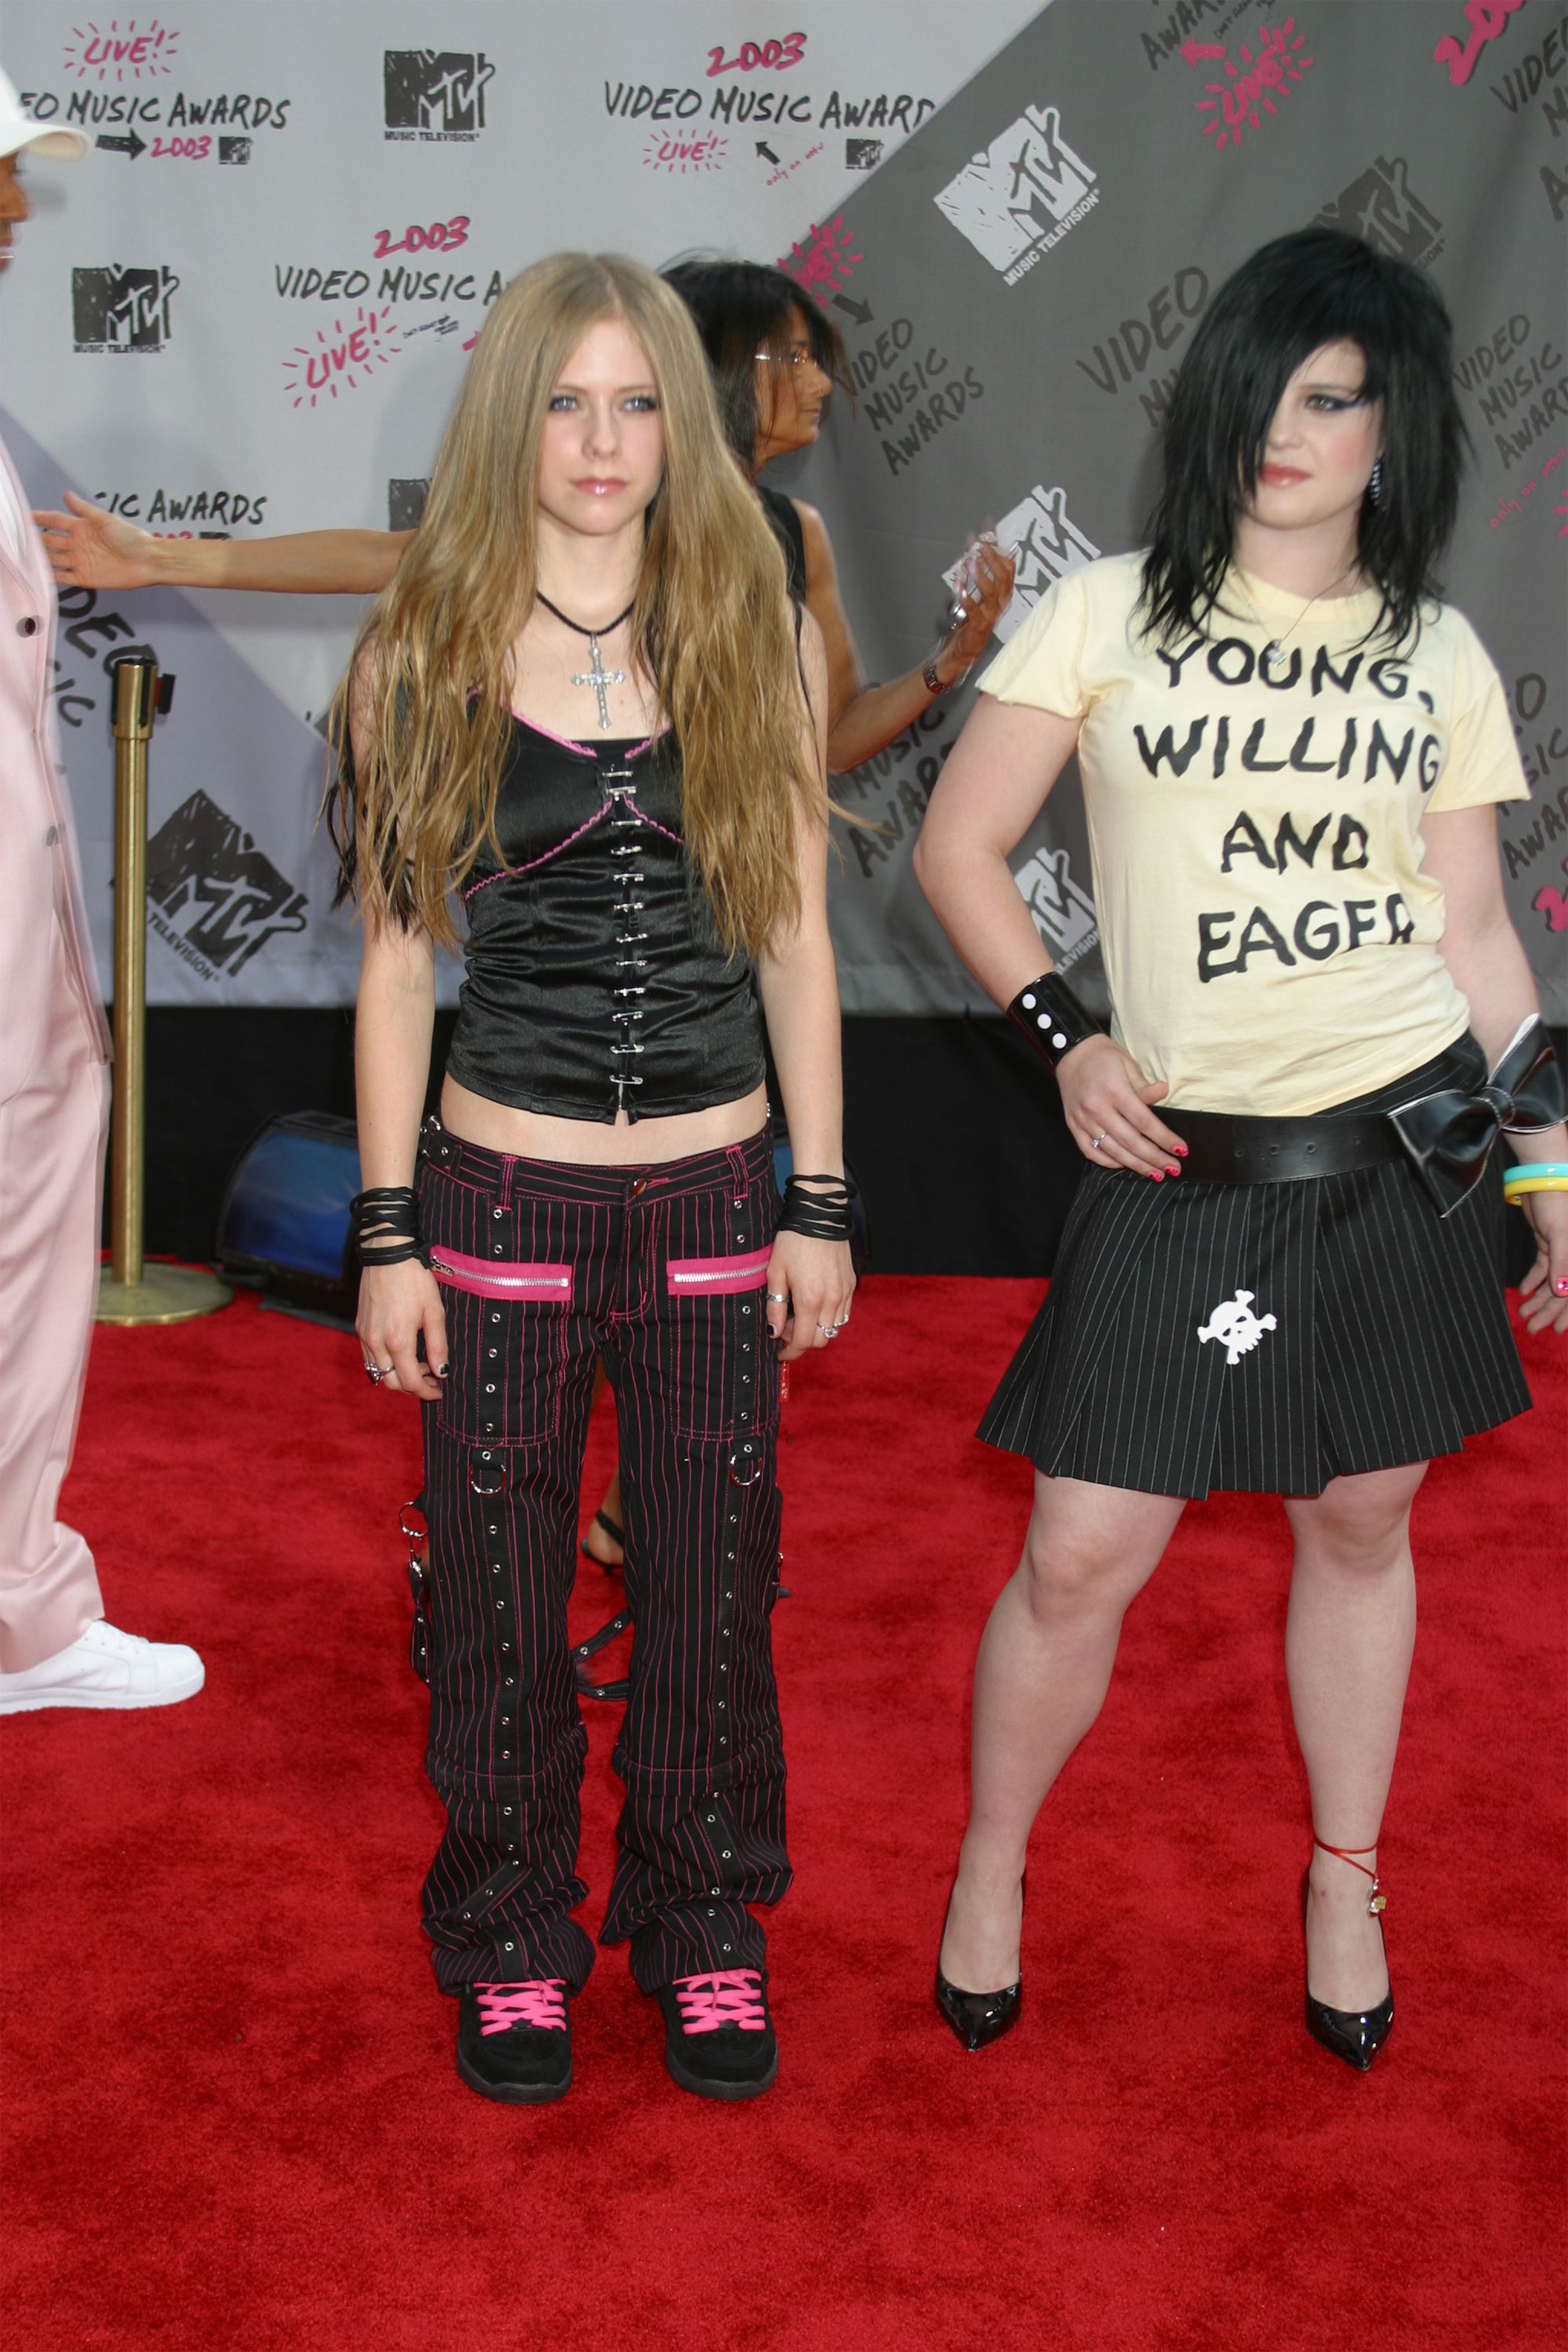 Image result for early 2000s celebrity fashion